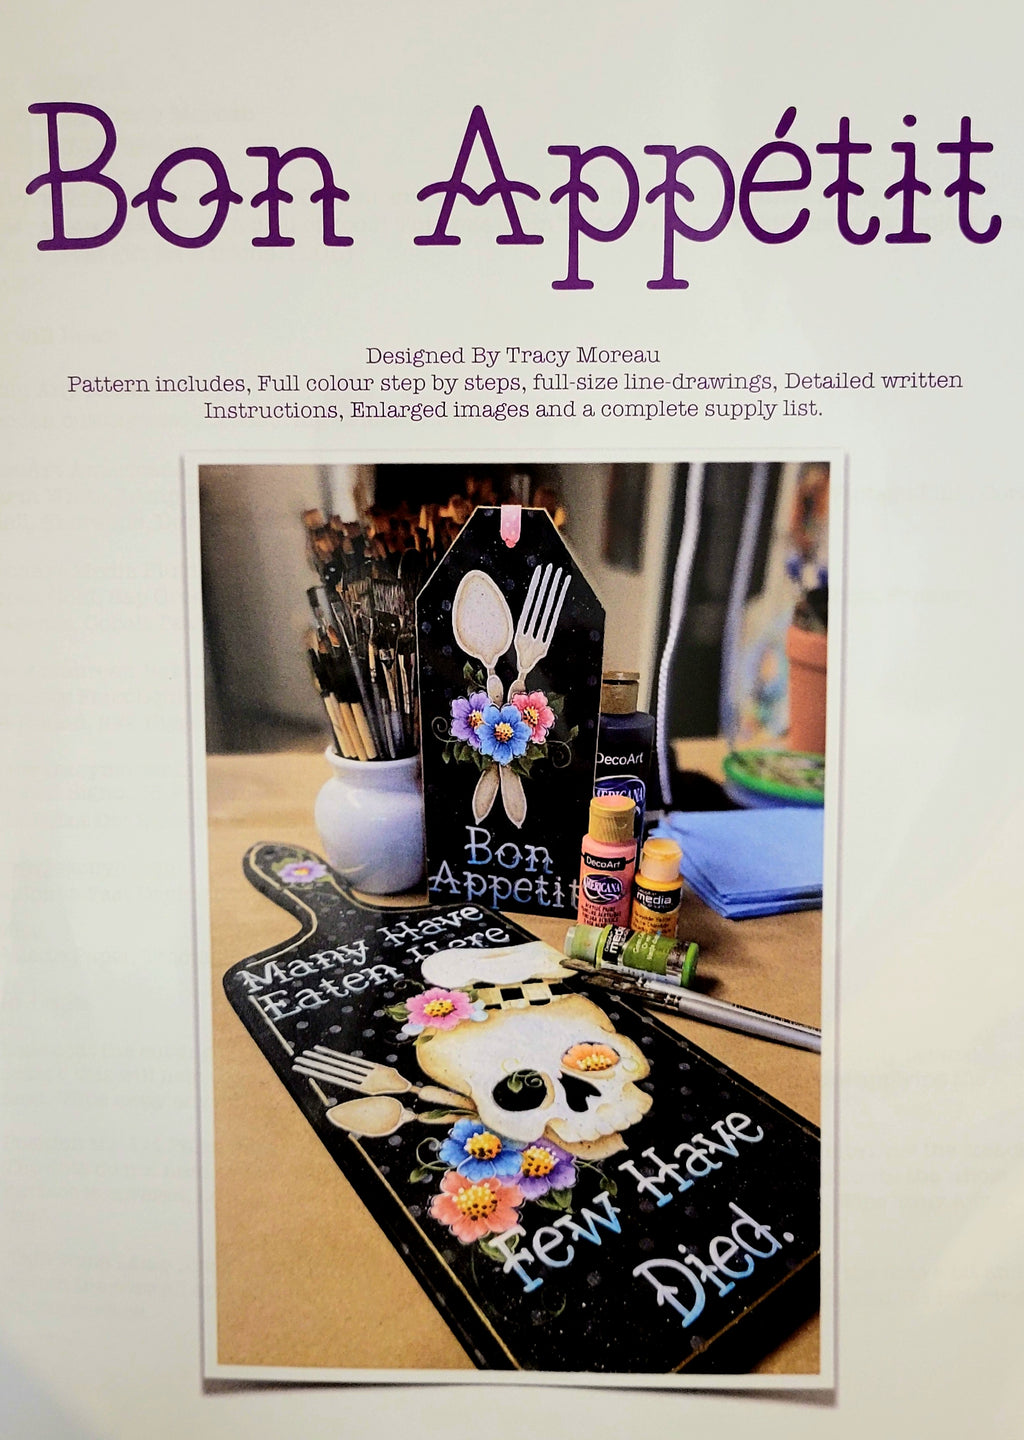 Bon Appetit packet by Tracy Moreau